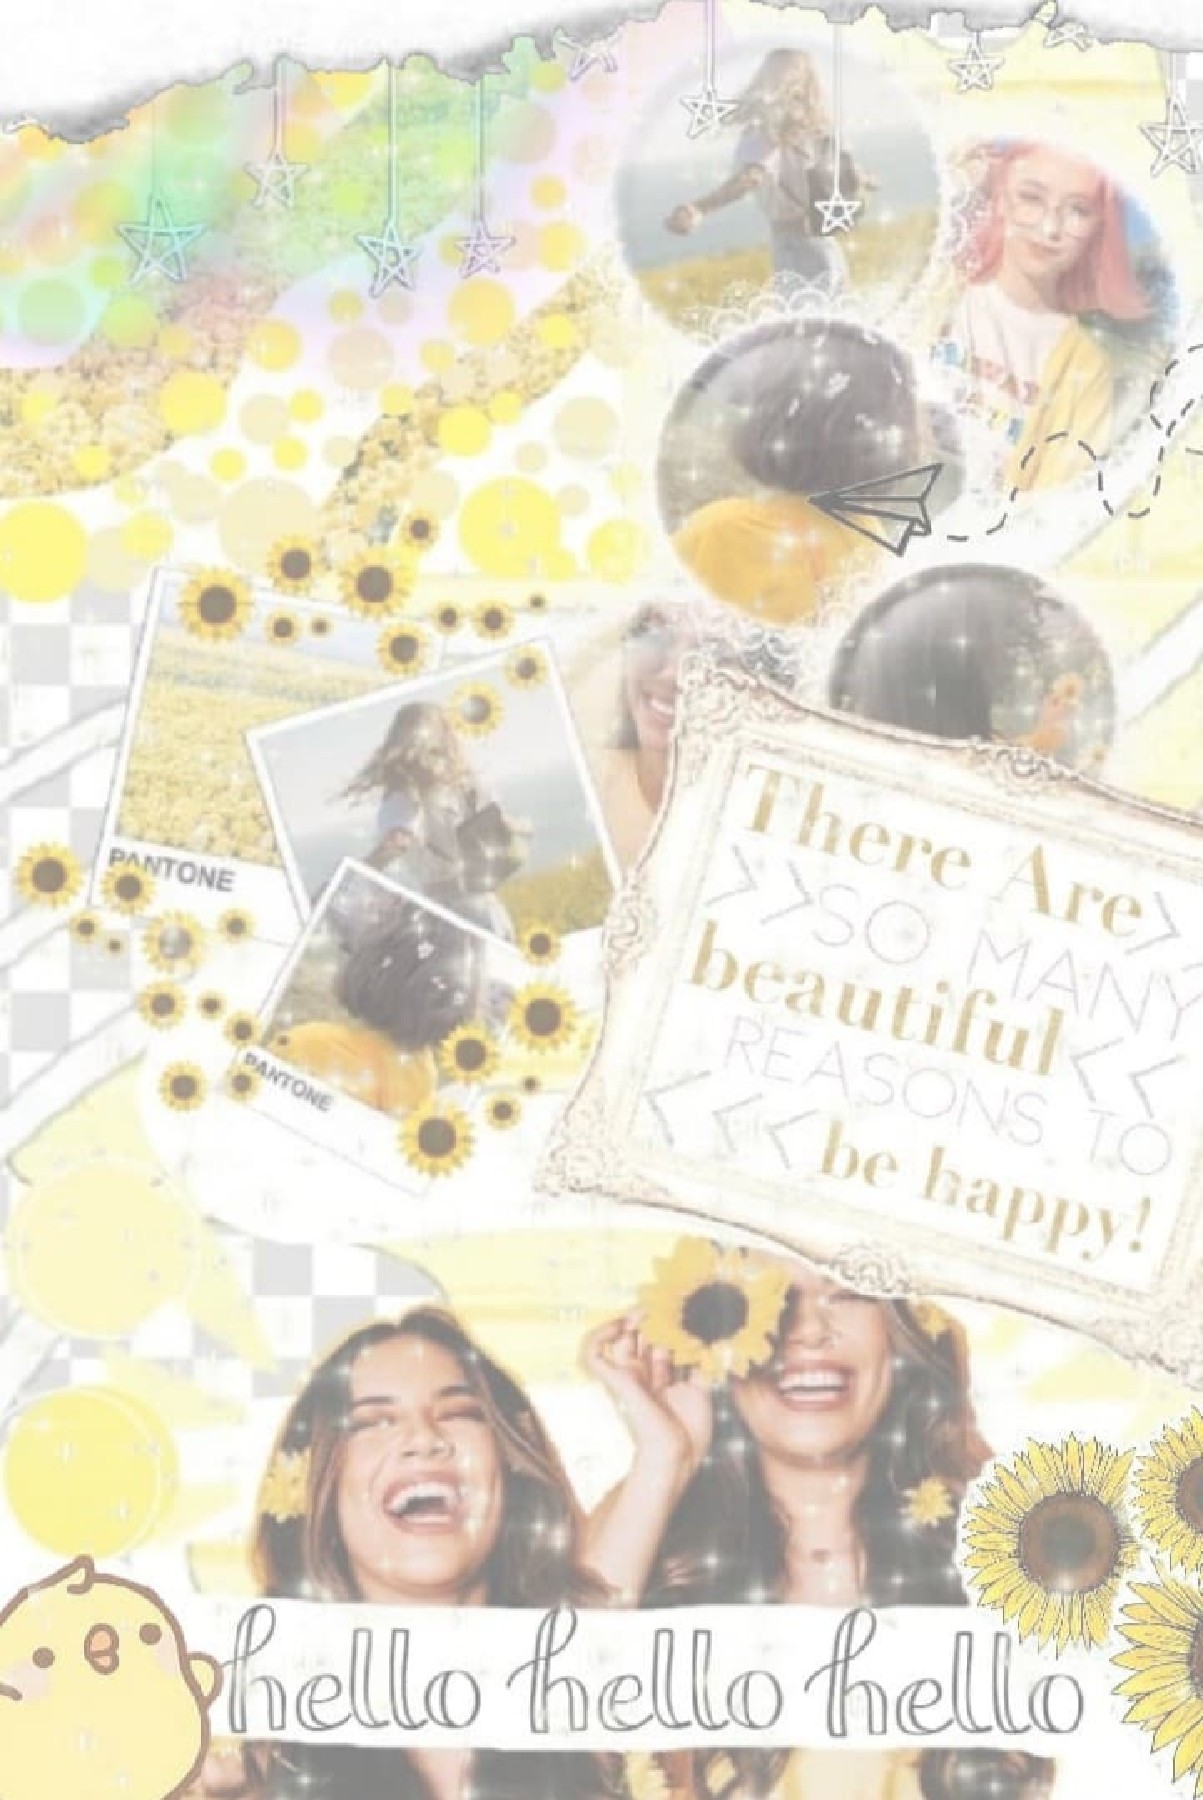 💛TAP💛
🌻10-08-22🌻
Collab with...
@Copy-Cat in the contest of @Wandering-Wind 💛 our theme was happiness 😄 i enjoyed doing this! Love y'all 💛